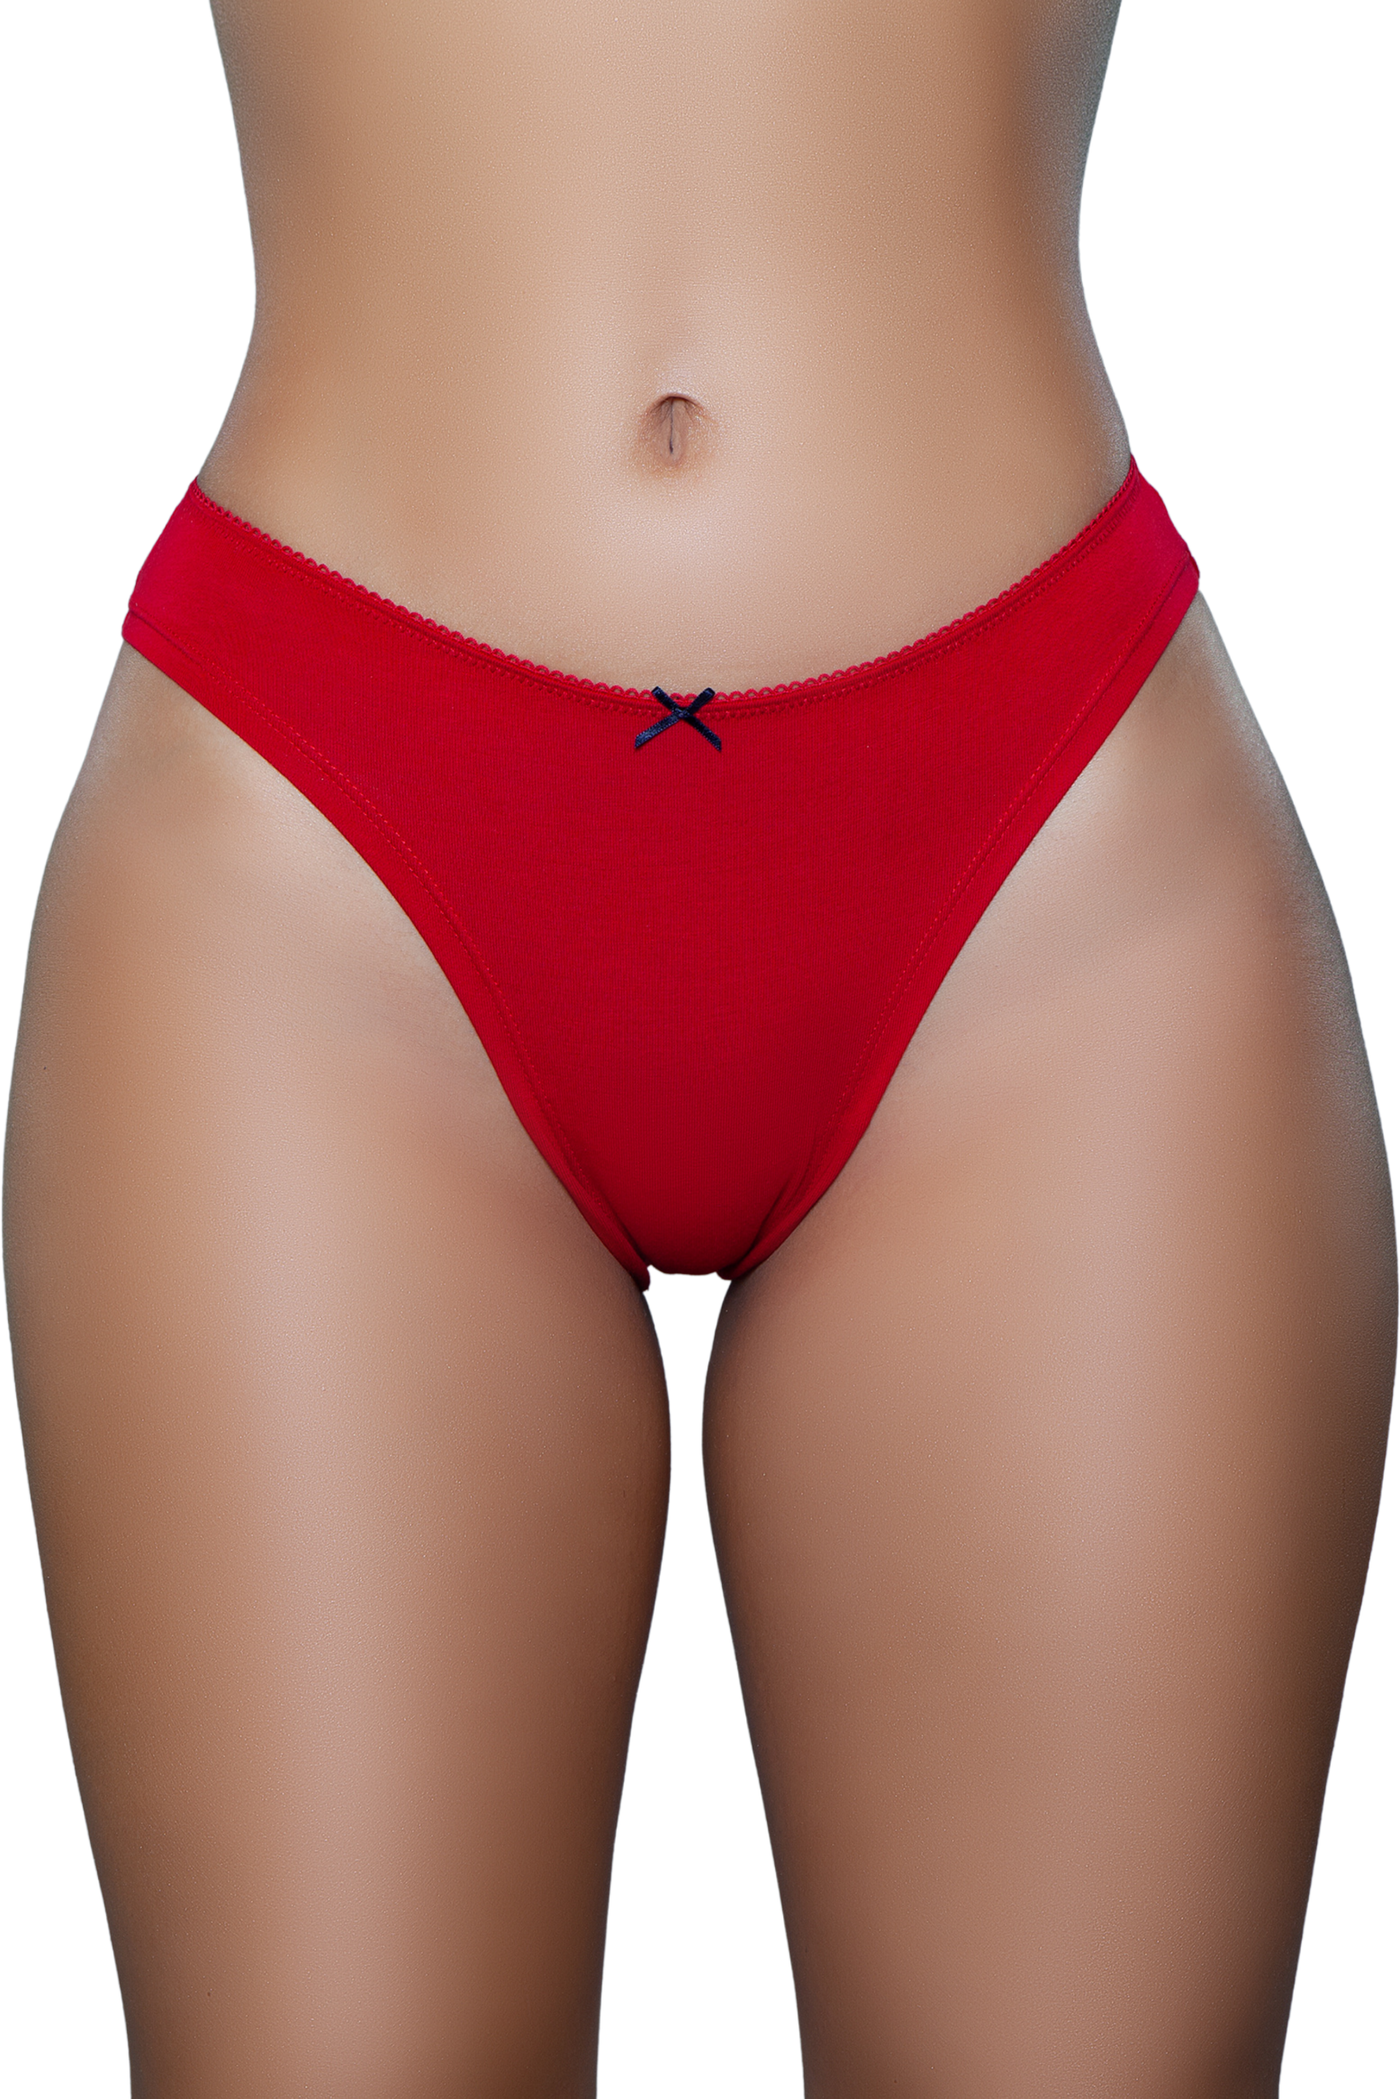 3pc. Low-Rise Jersey Knit Brief Panties - For Love of Lingerie